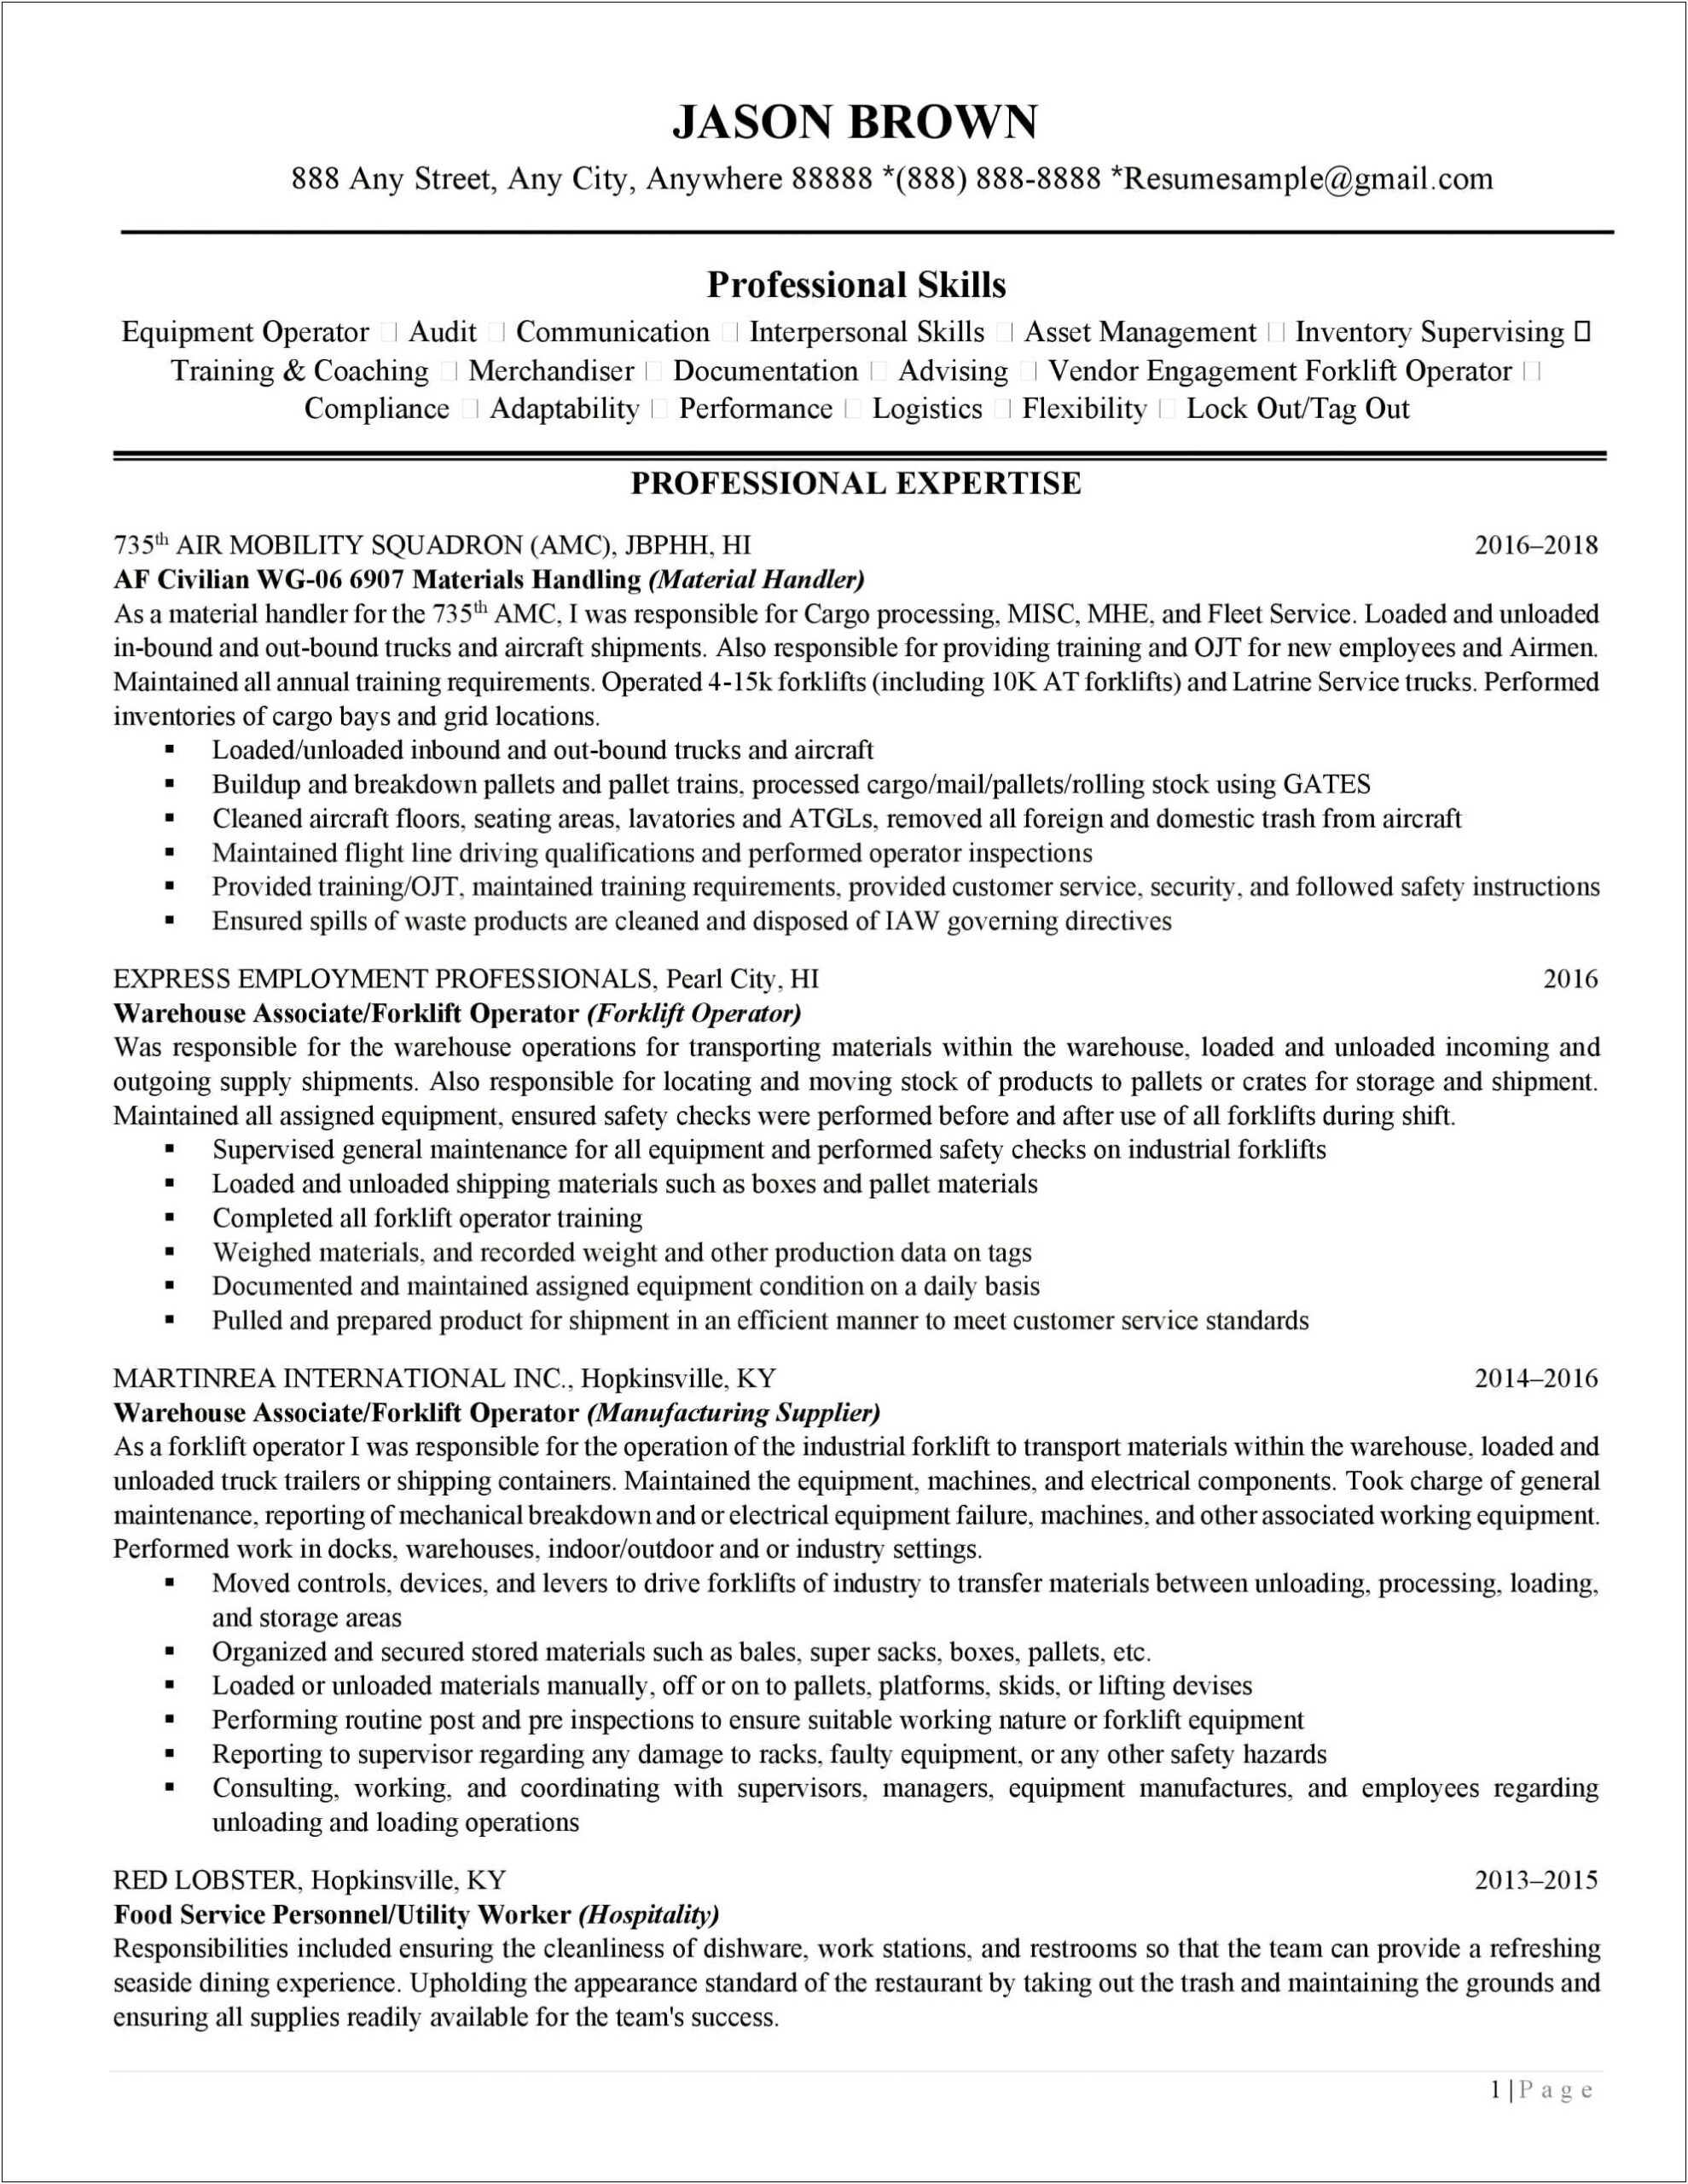 Resume Example From A Professional Writer